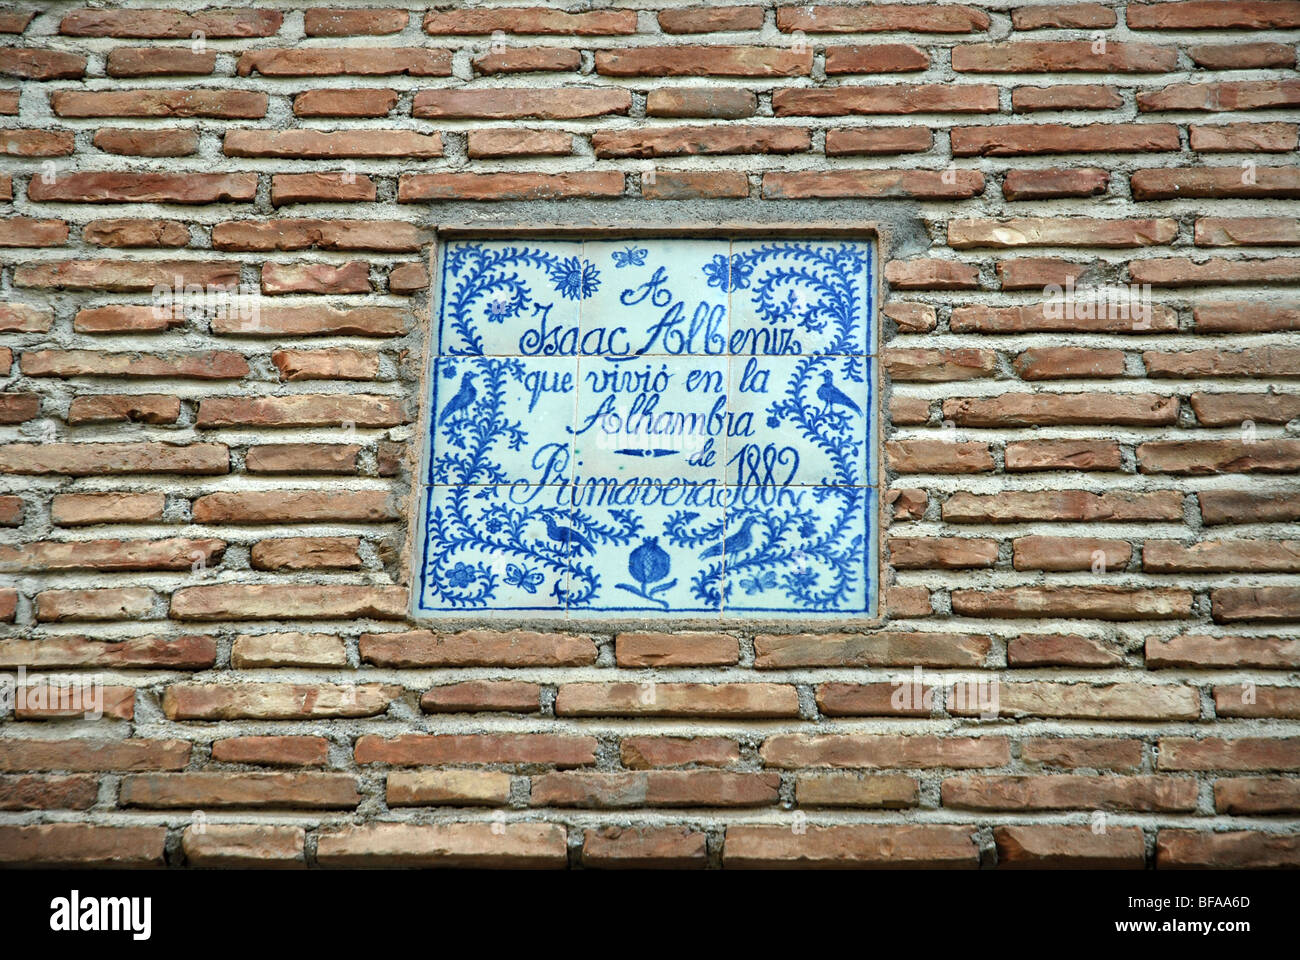 tiled wall sign in memory of Isaac Albeniz who lived in the Alhambra in Spring 1882, Alhambra, Granada, Andalusia, Spain Stock Photo